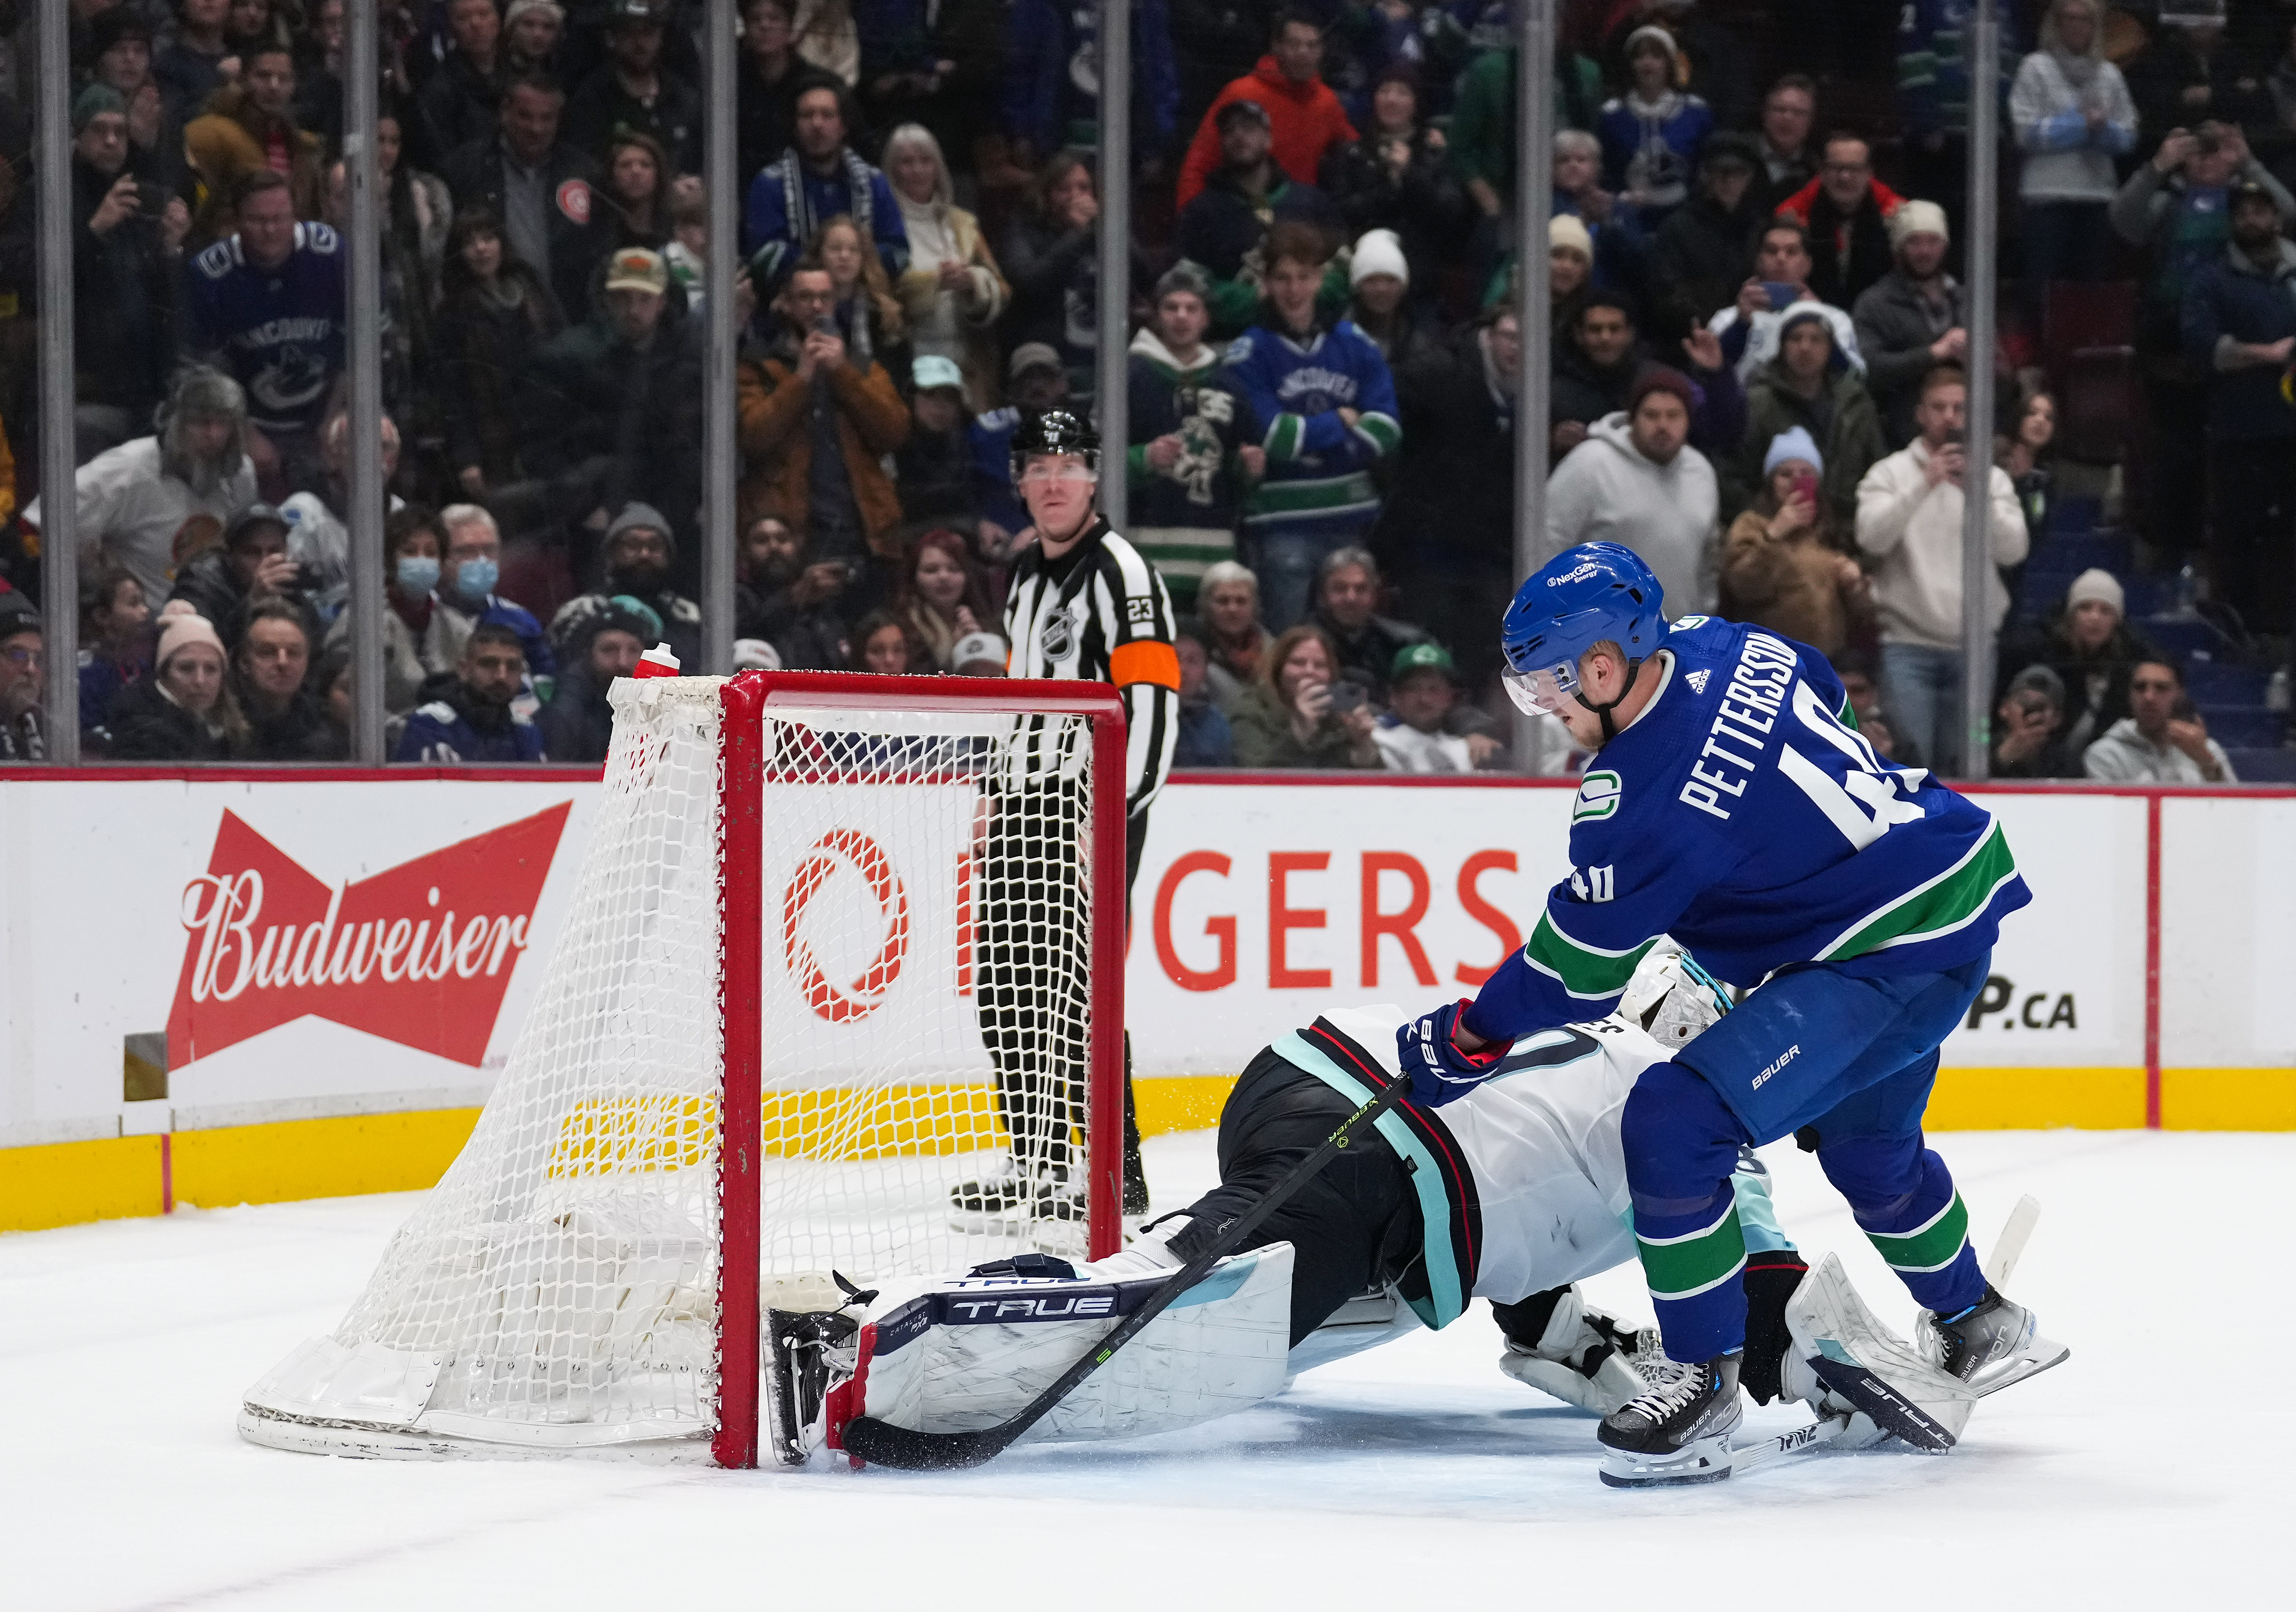 Report: Canucks' Pettersson wants to 'play for a team that's winning